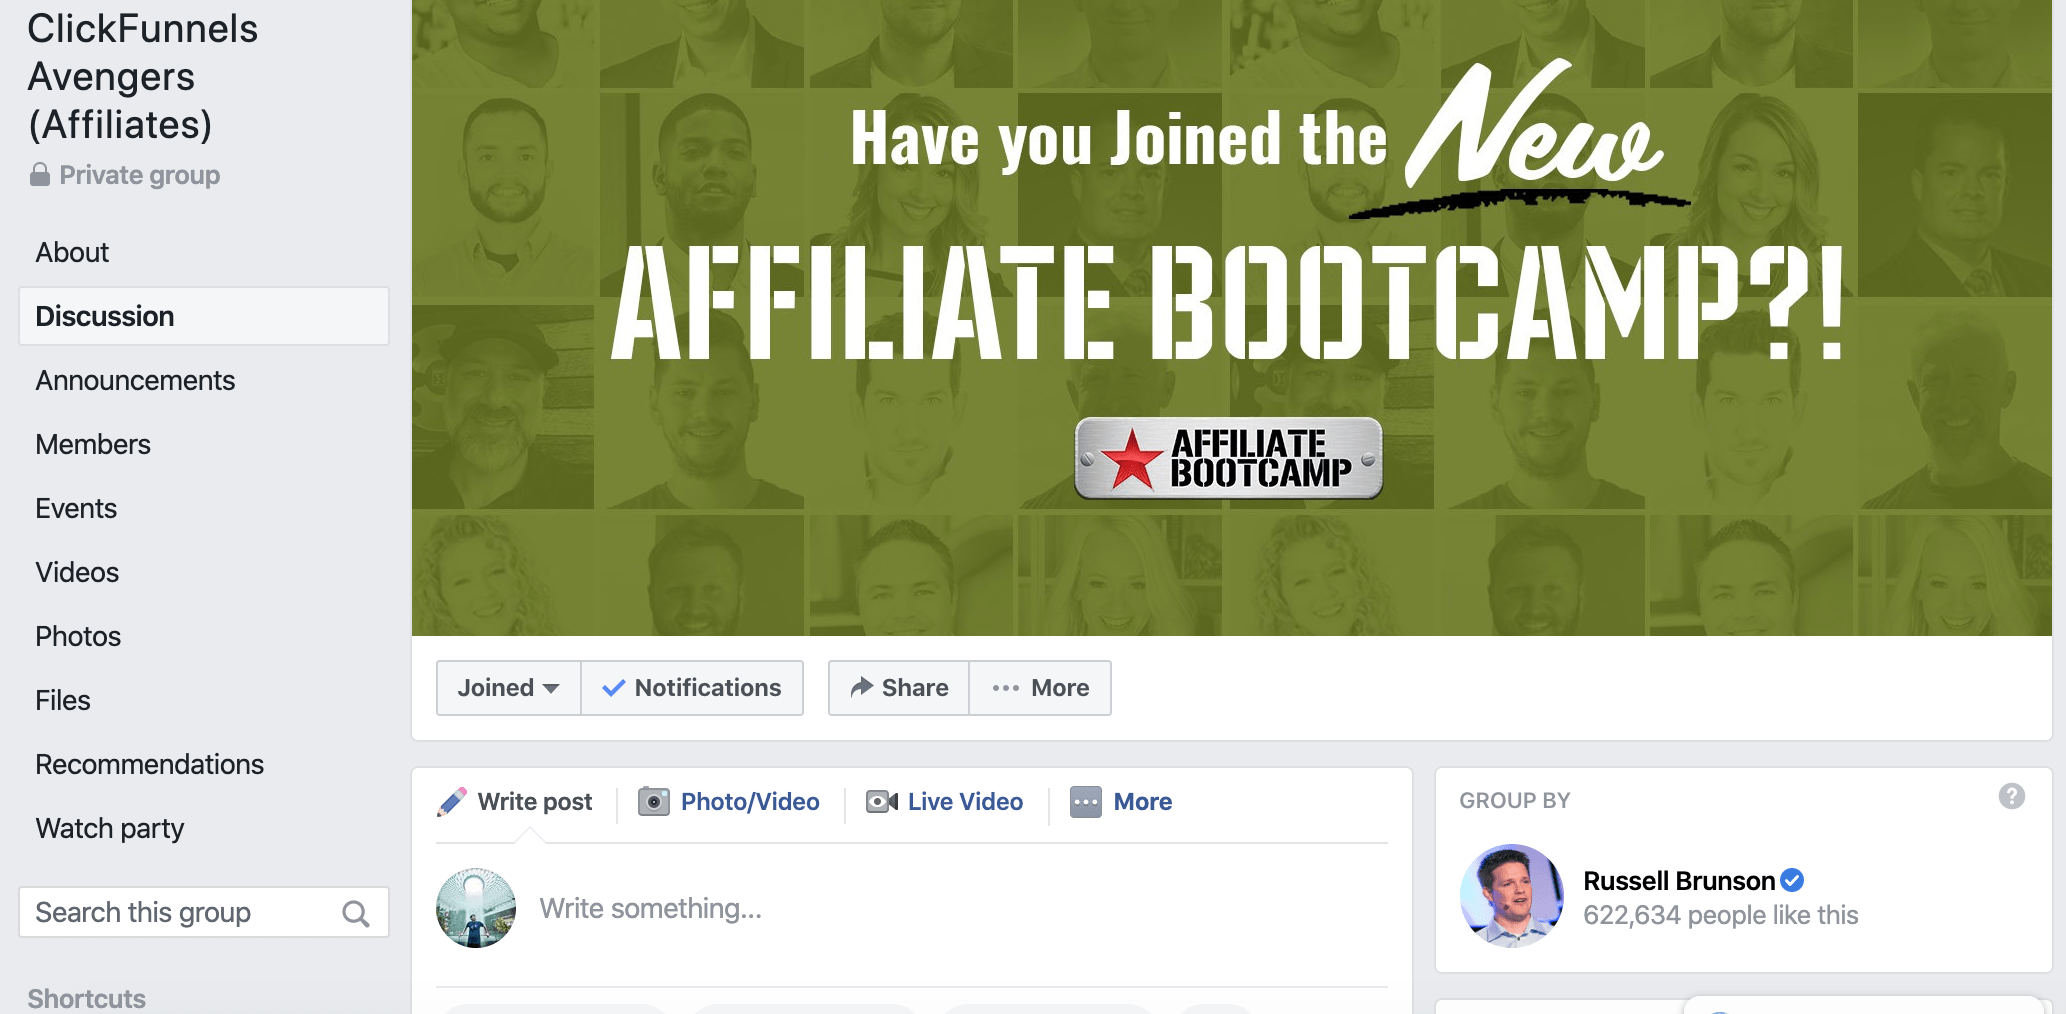 Clickfunnels Affiliate Bootcamp Facebook Page New